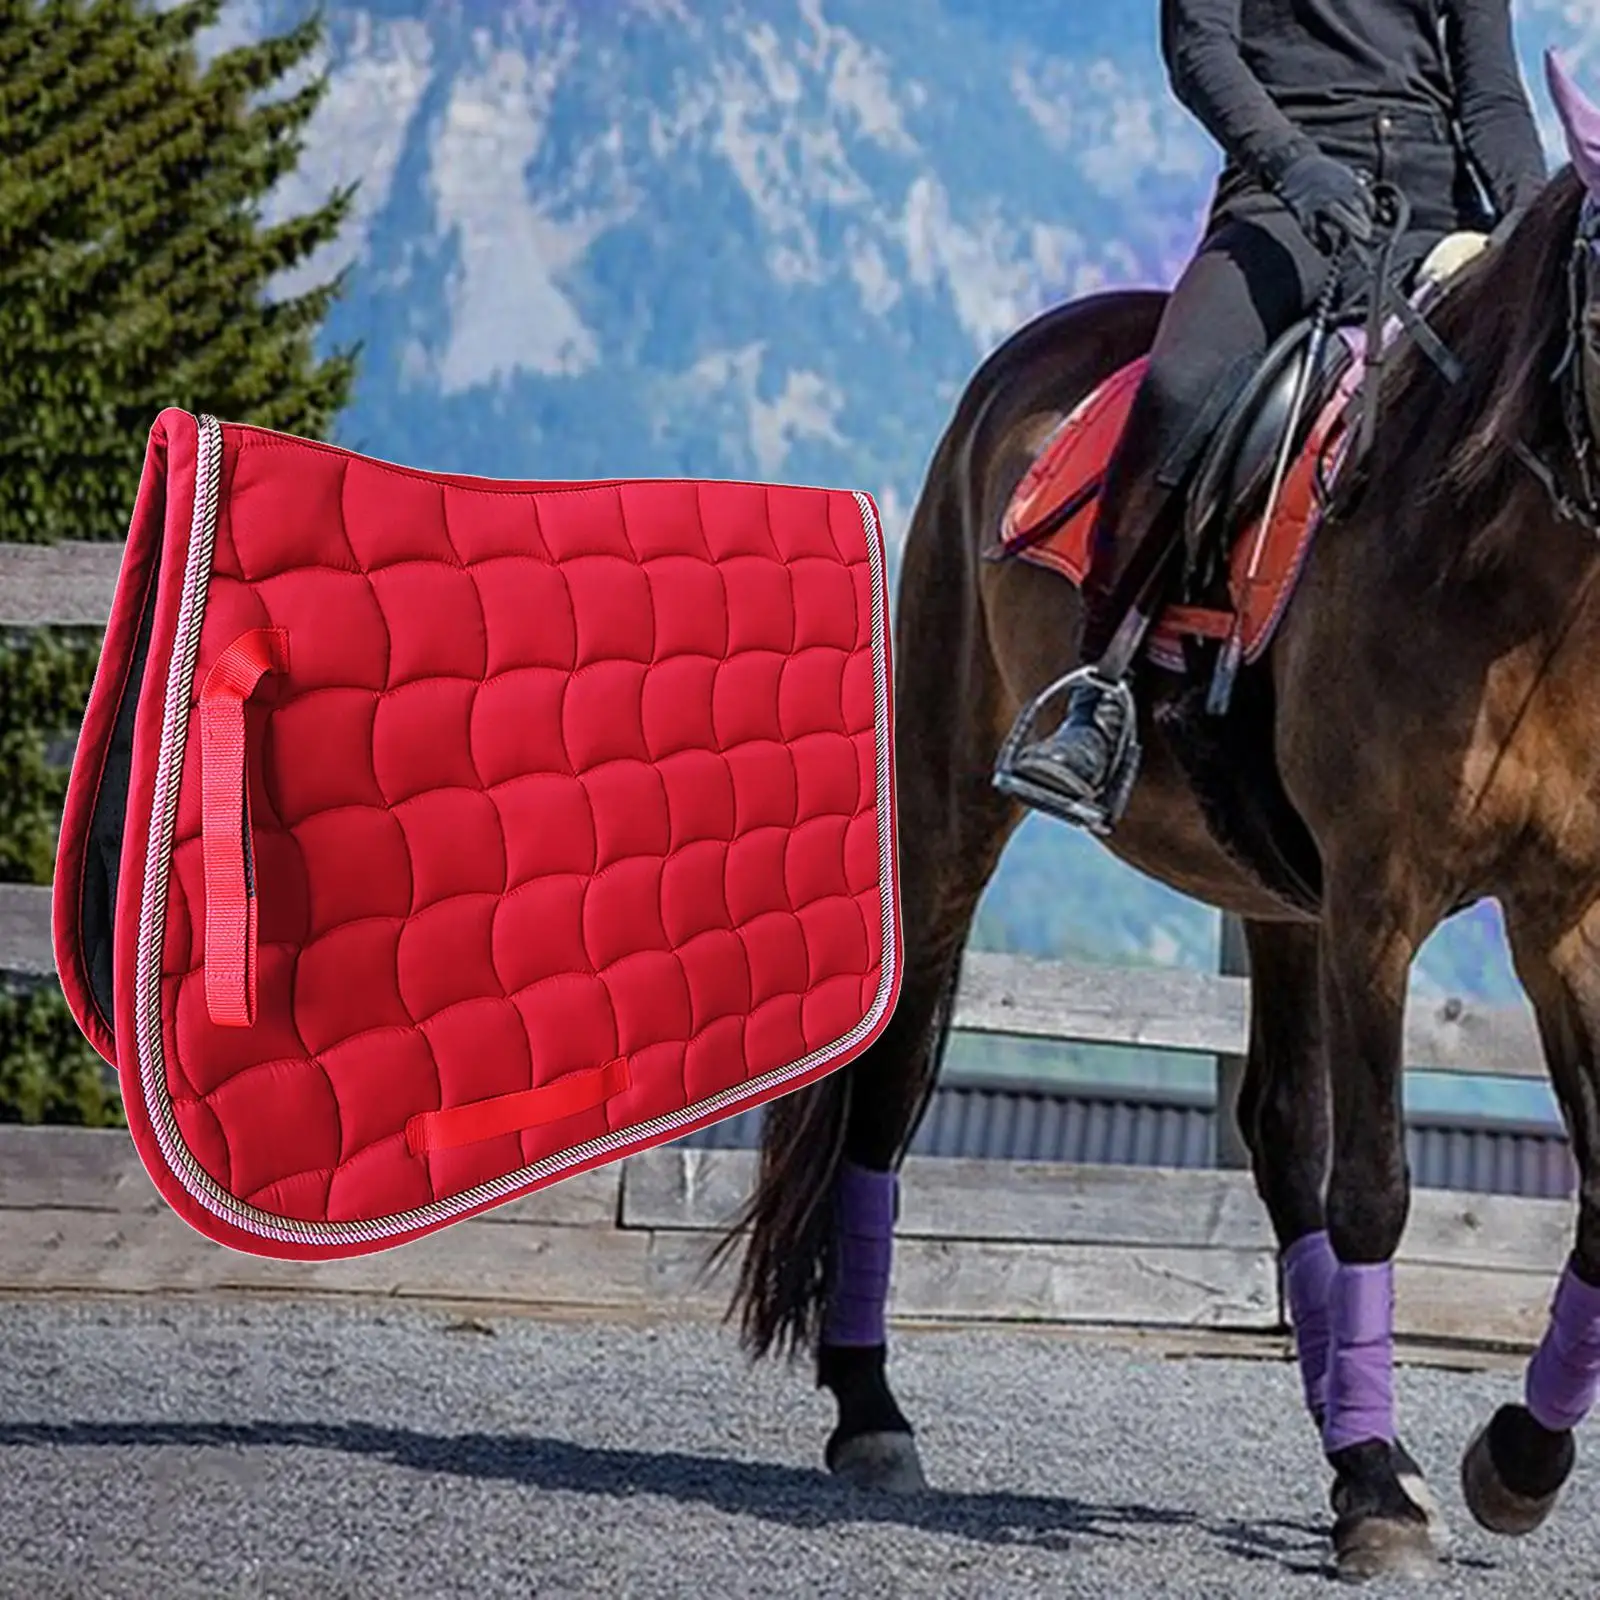 English Saddle Pad, Saddle Pads for Horses - Equestrian Gear - Diamond Quilting Sports Gear Riding Accessories